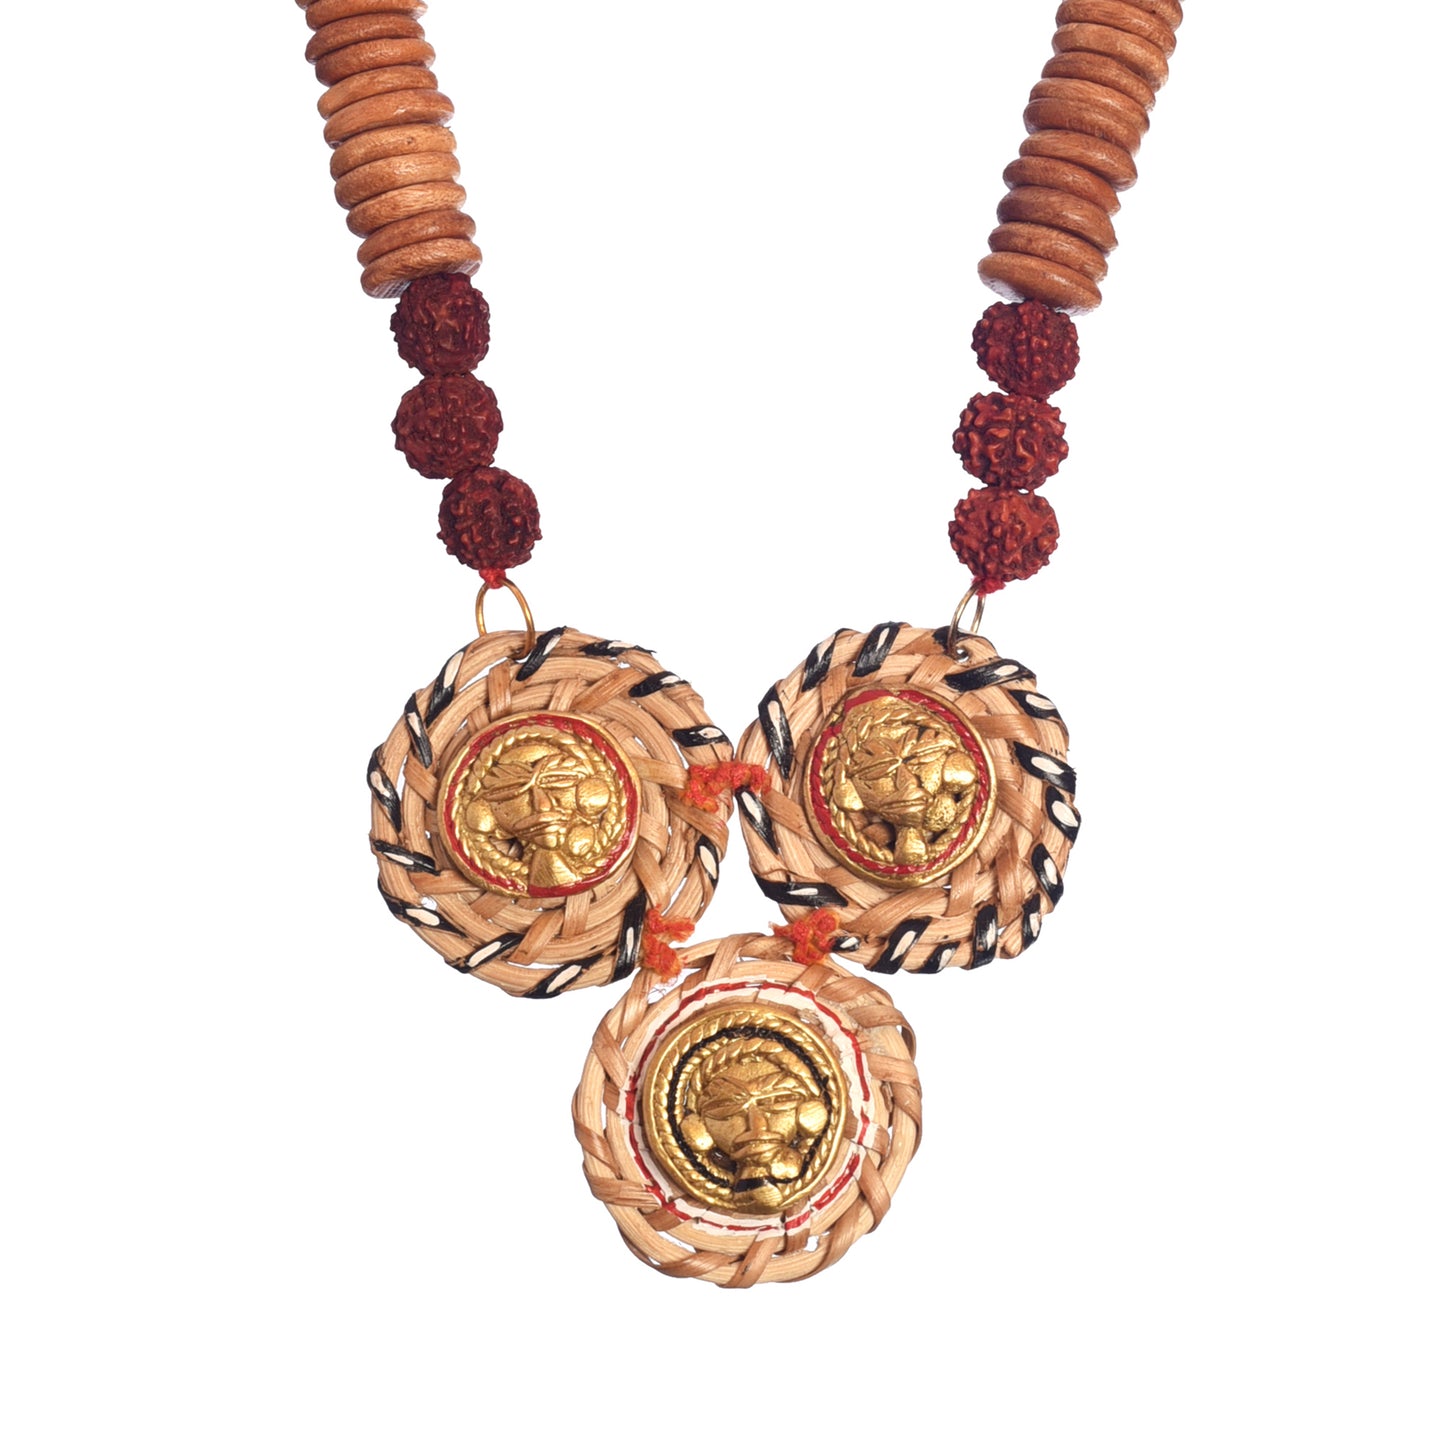 The Monks' Handcrafted Tribal Dokra Necklace